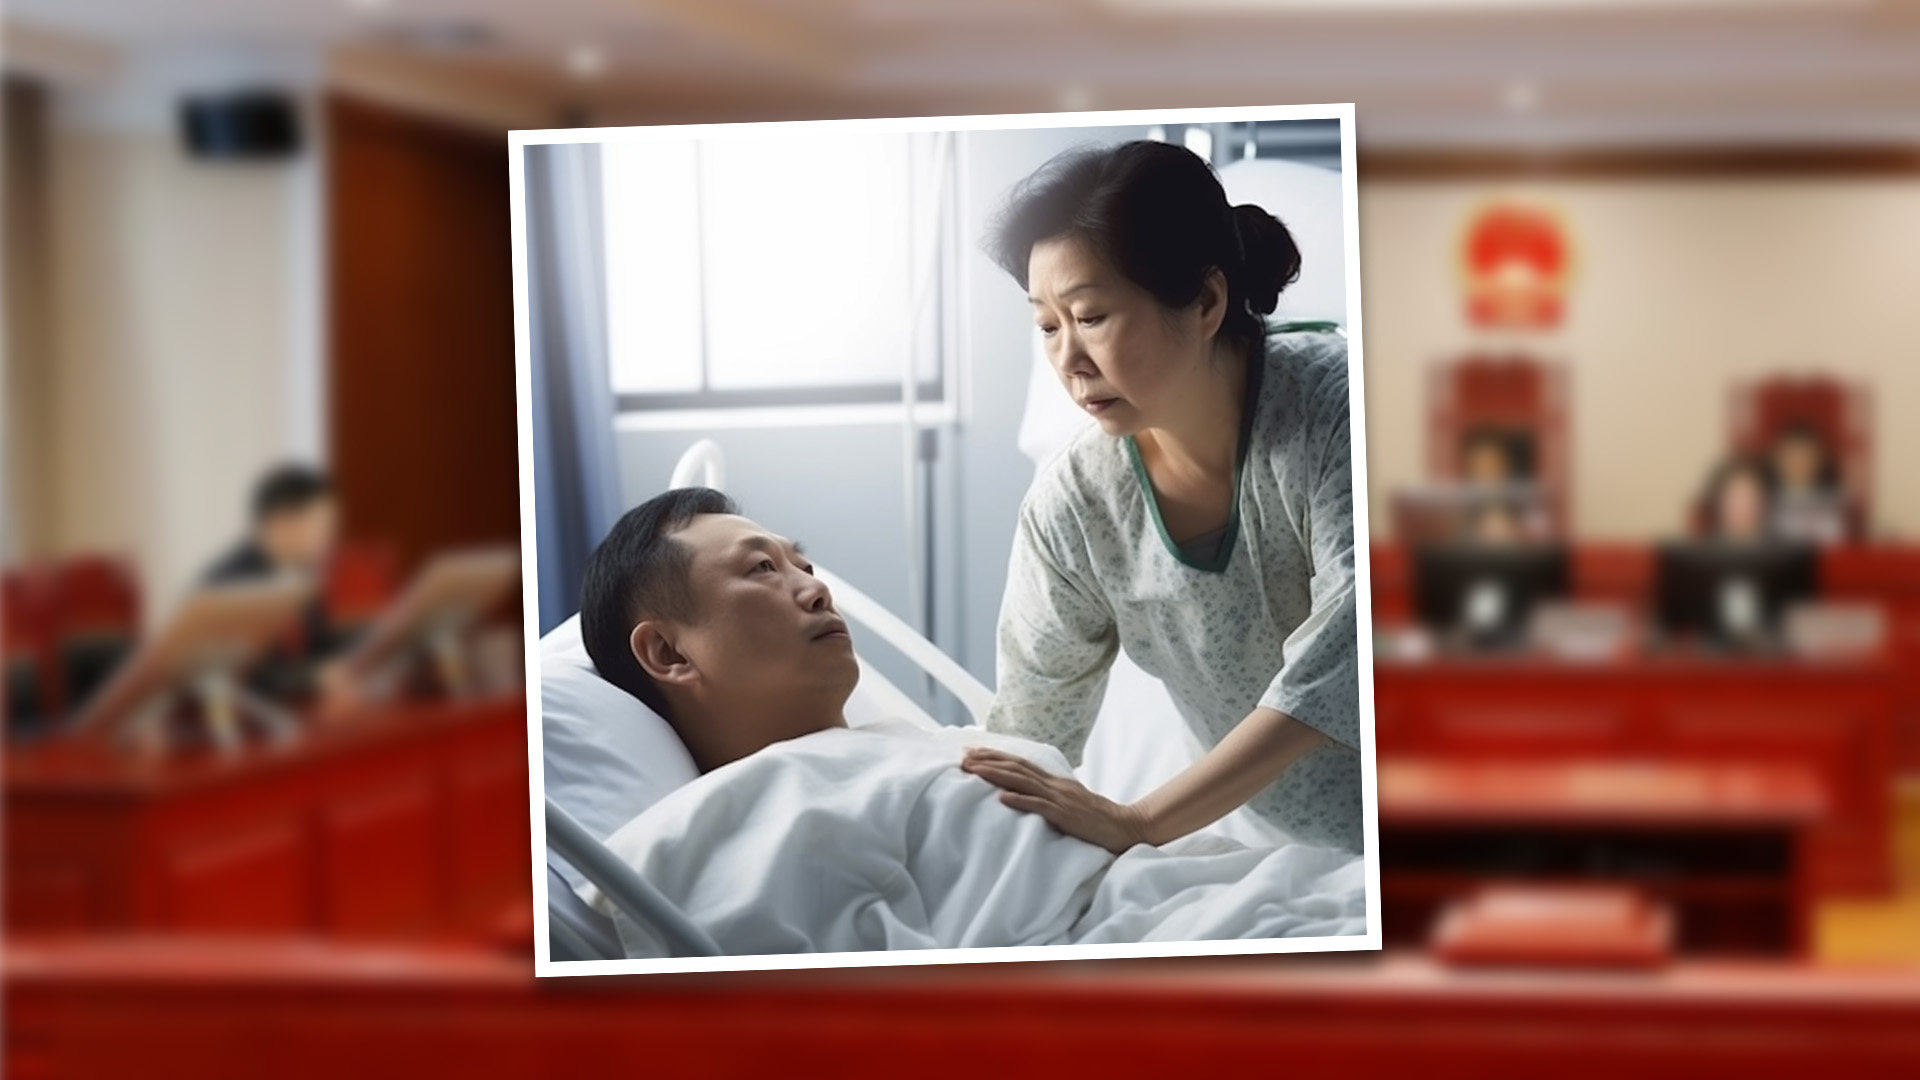 An elderly couple in China have sought a divorce on behalf of their son, who is in a vegetative state, so that his devoted wife can have a chance to live her life, they say. Photo: SCMP composite